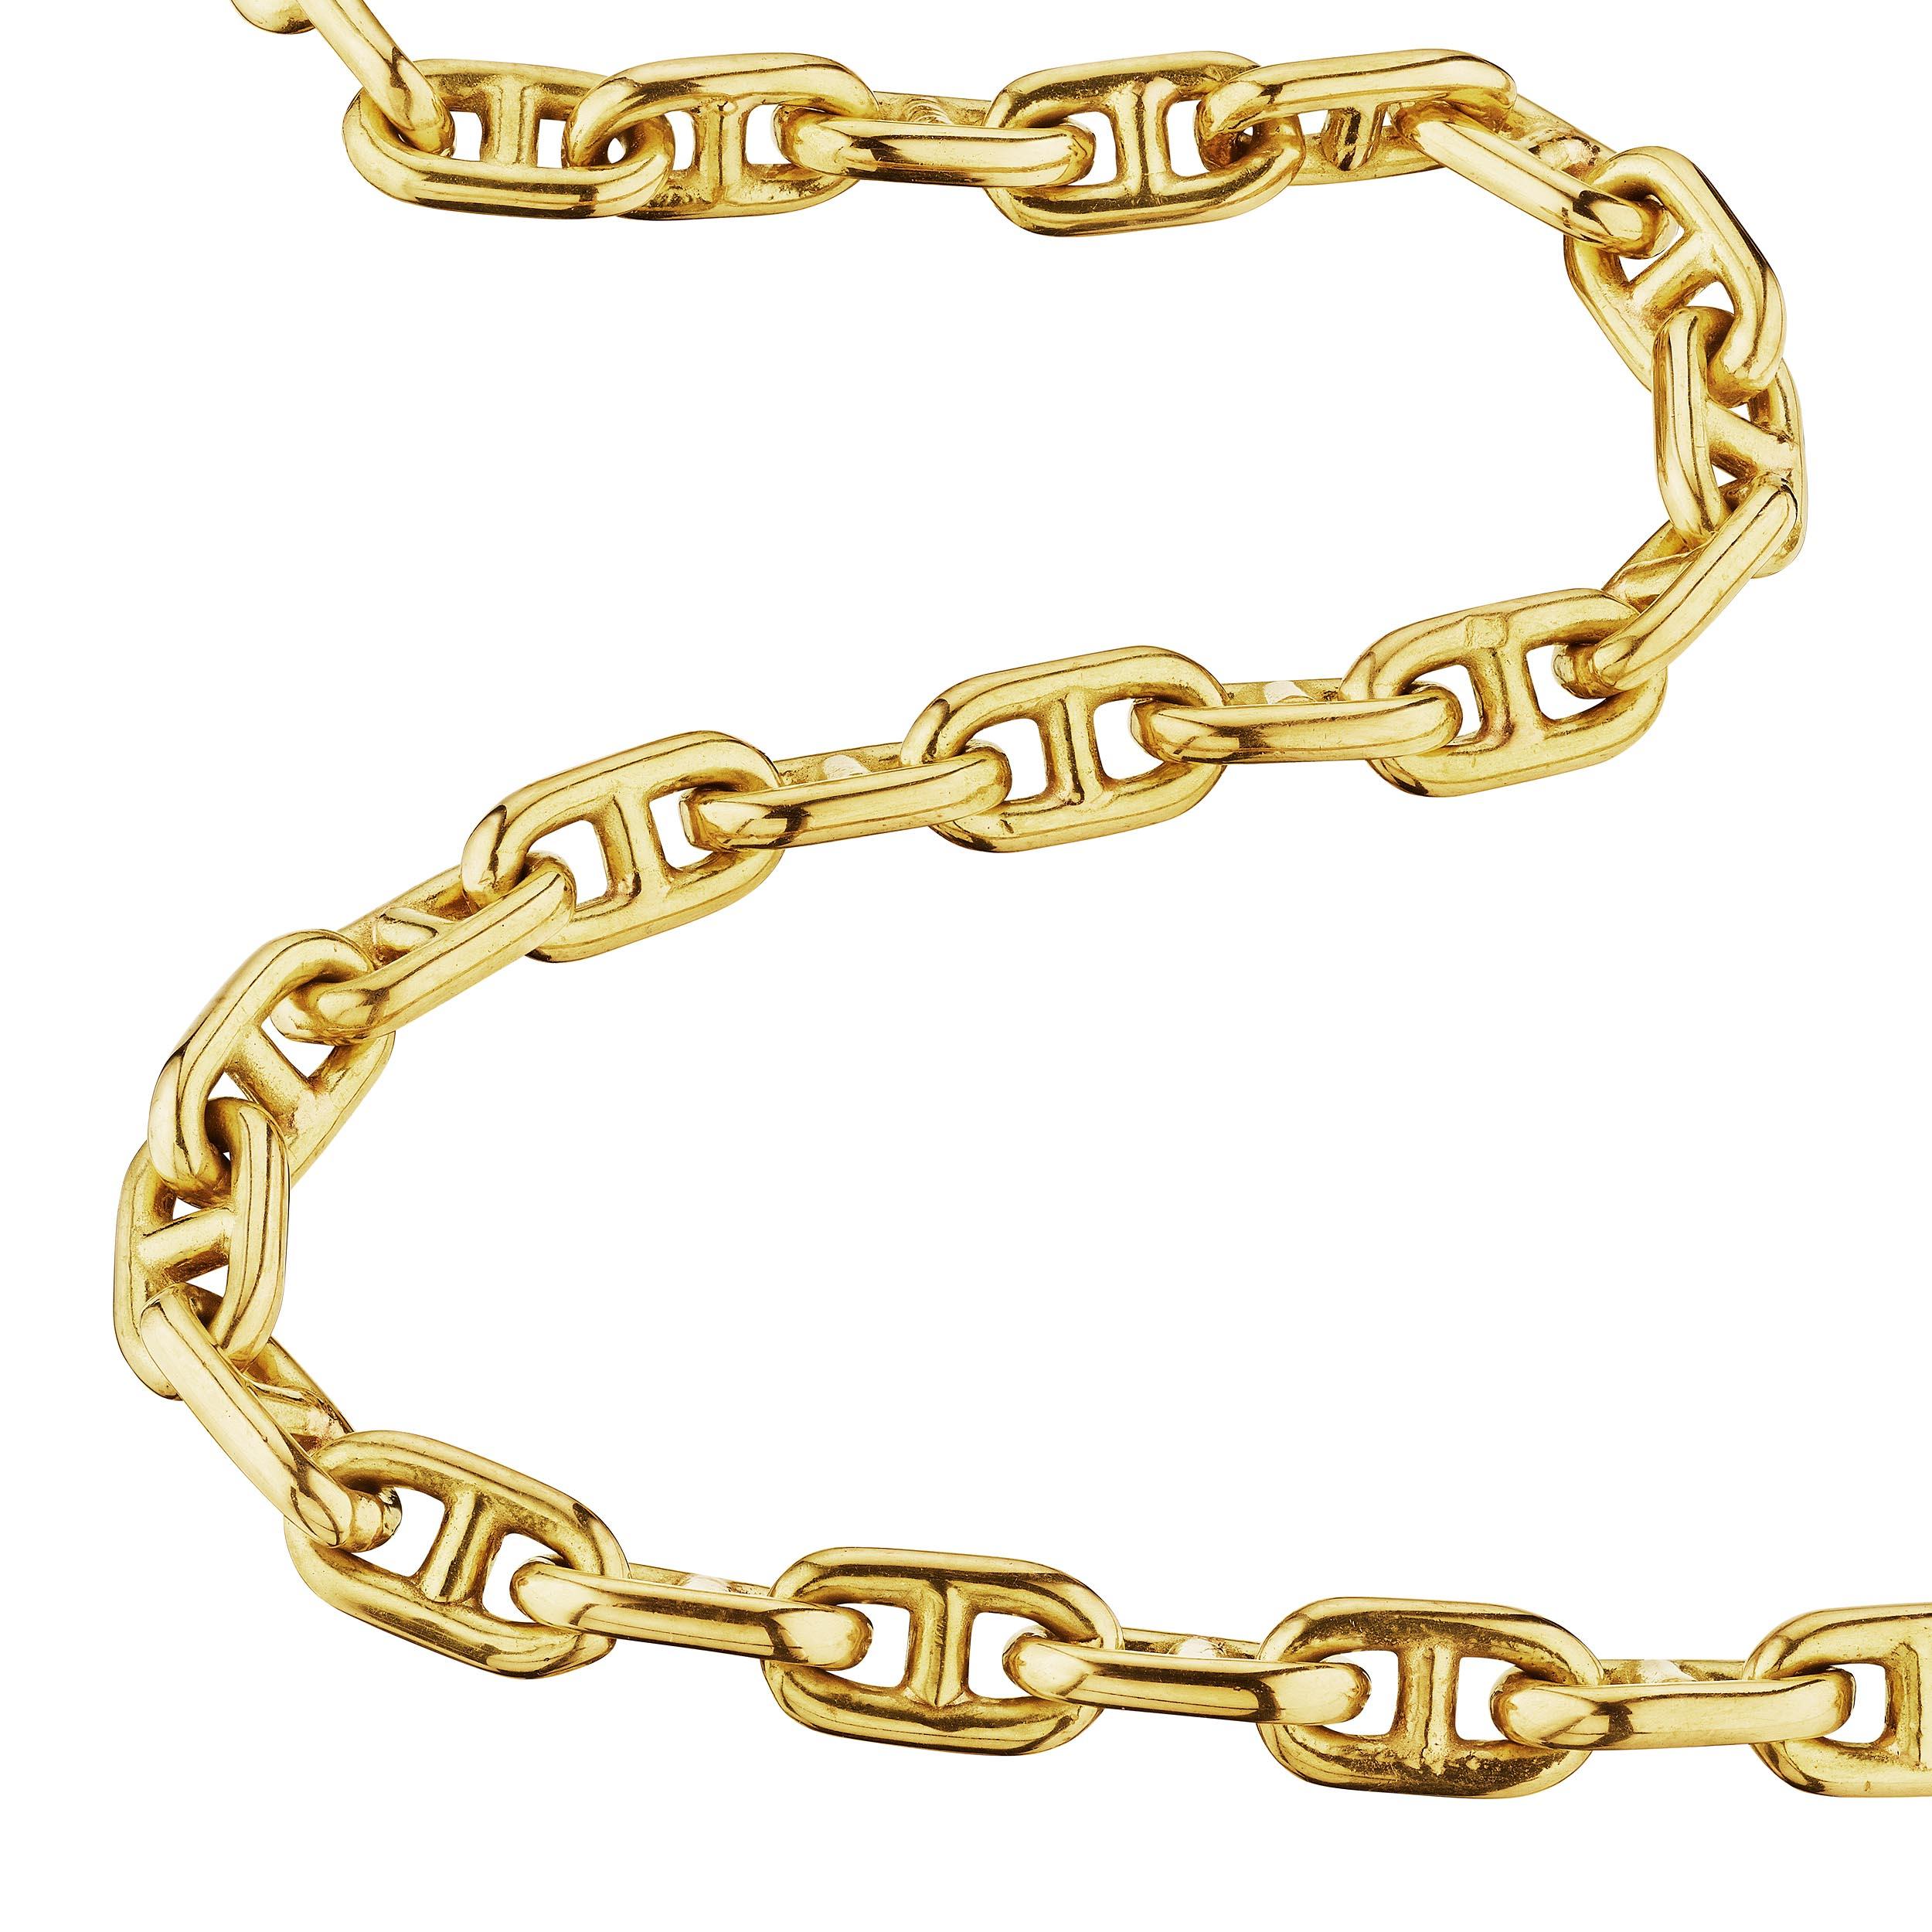 It is said that a chain is no stronger than its weakest link and this Hermes Paris vintage 18 karat yellow gold anchor chain is 35